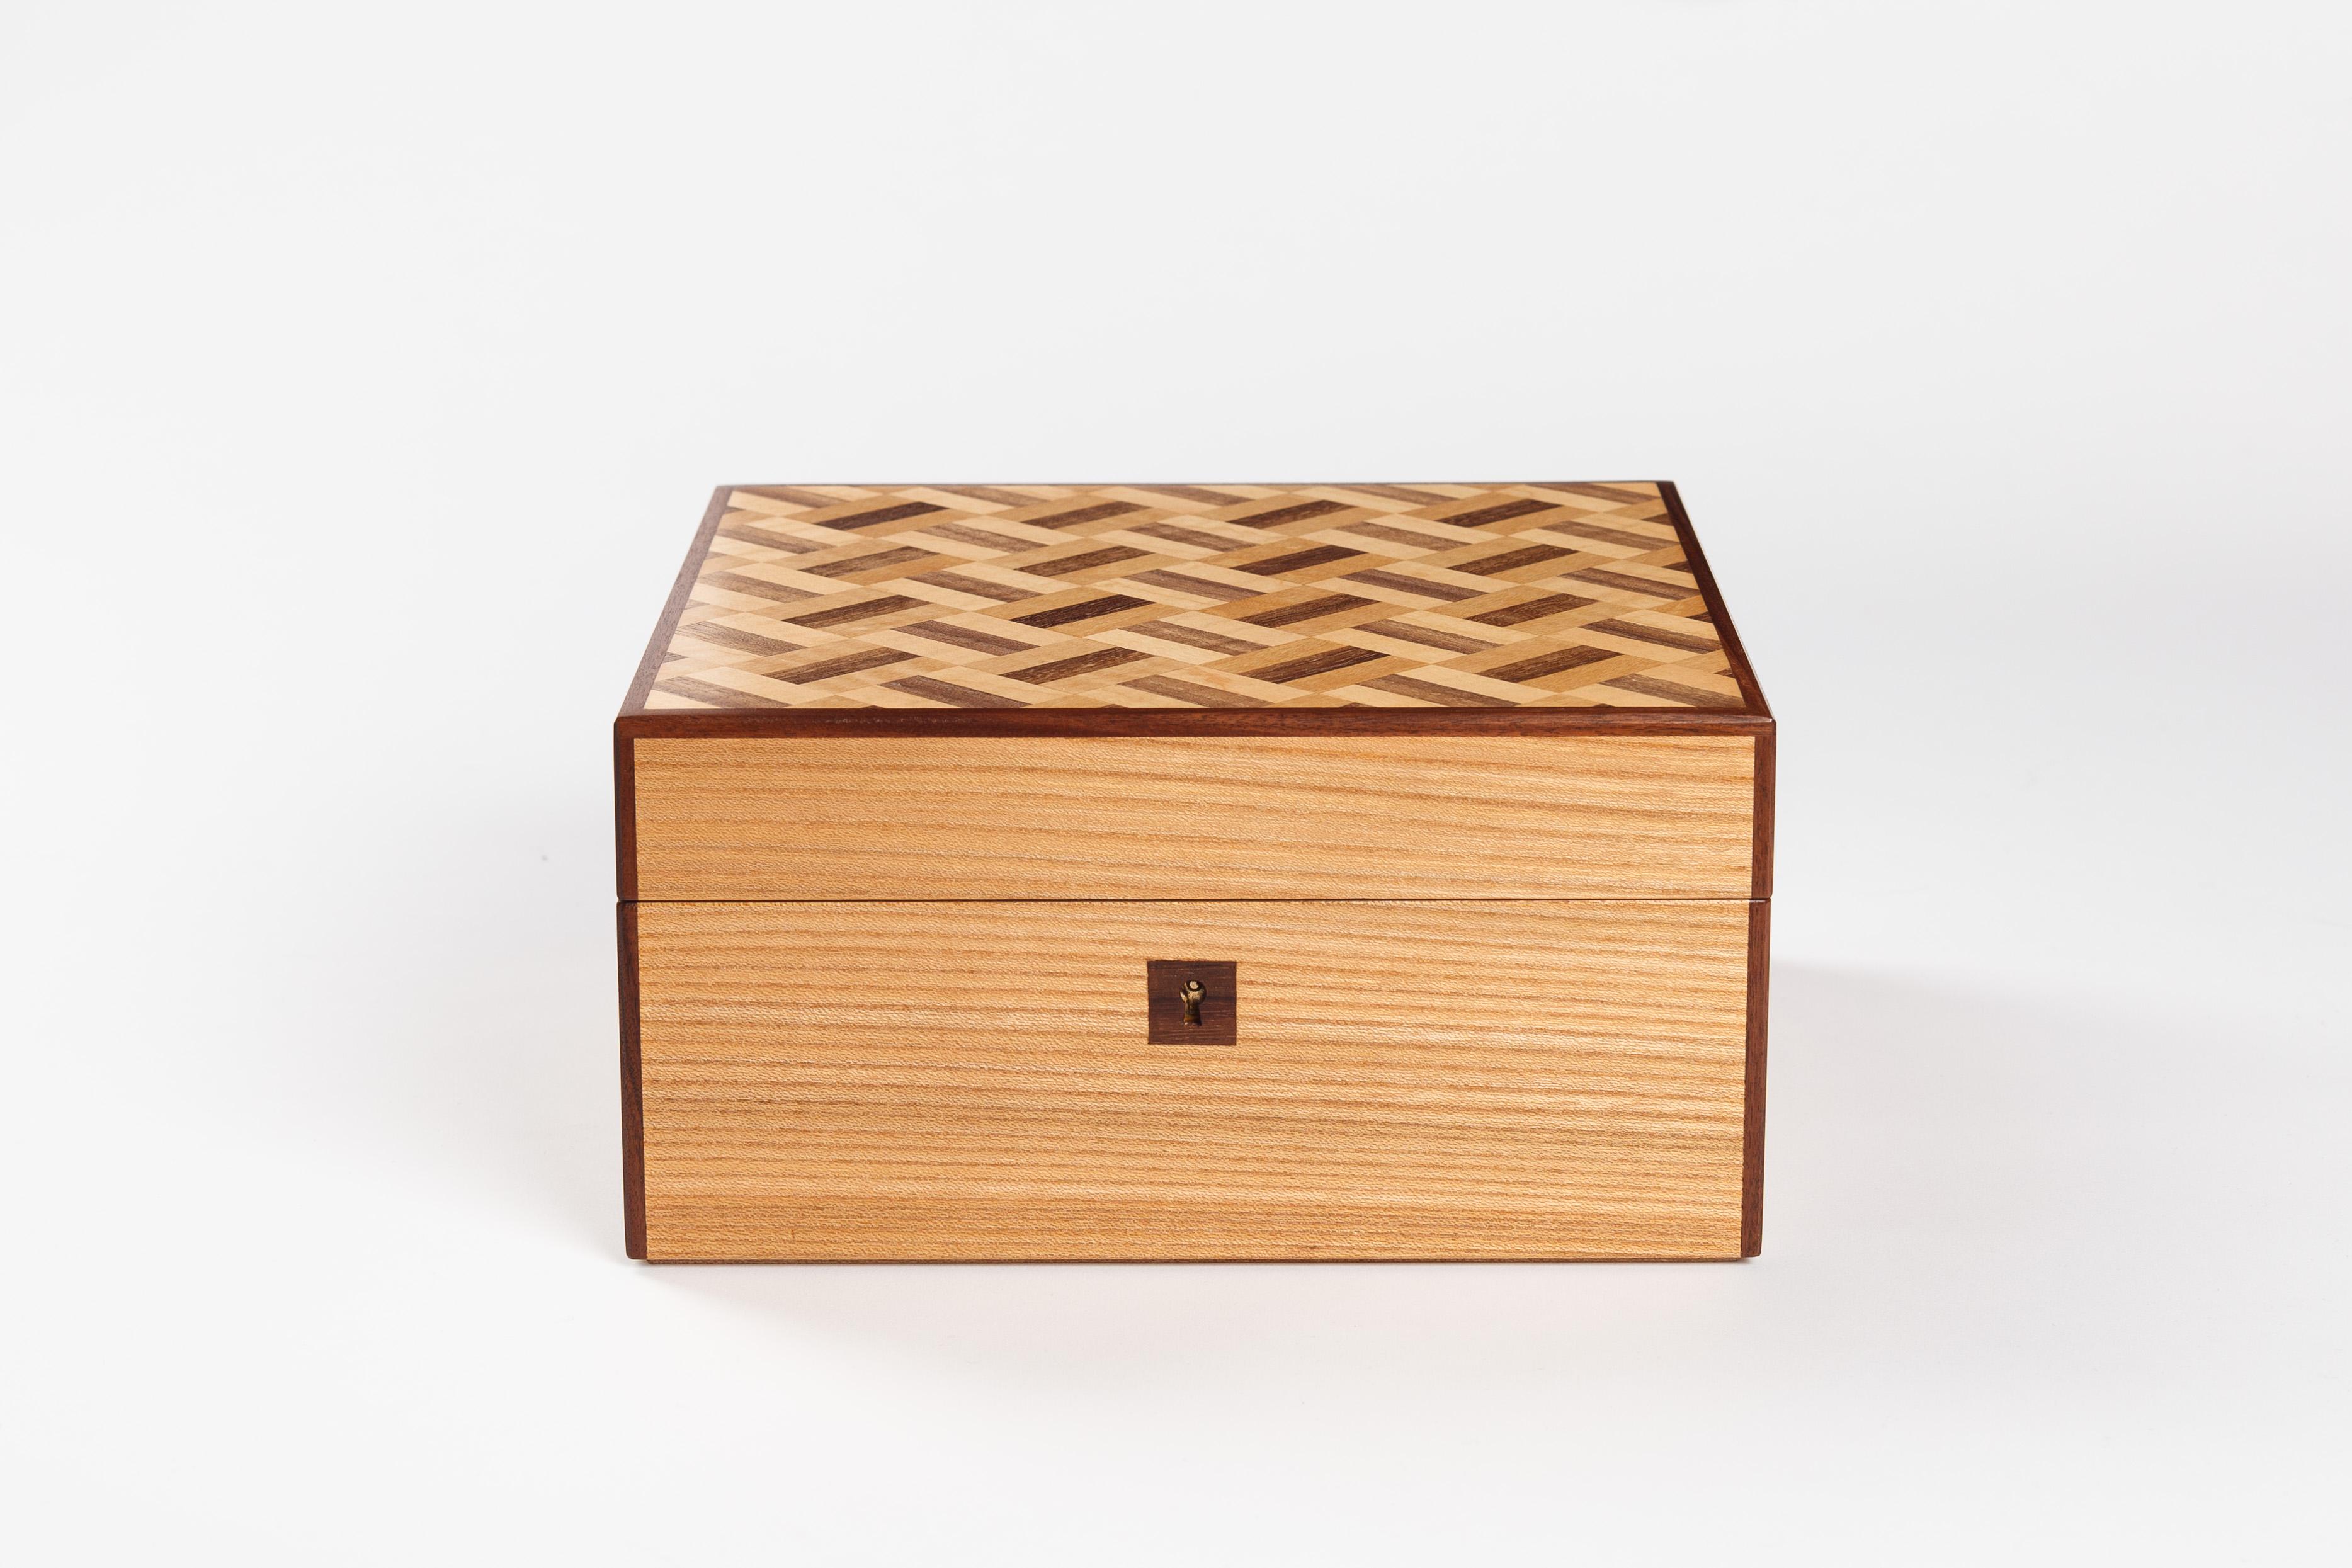 Watch Box in Scottish Elm with Maple and Walnut Basket-Weave Parquetry lid For Sale 1